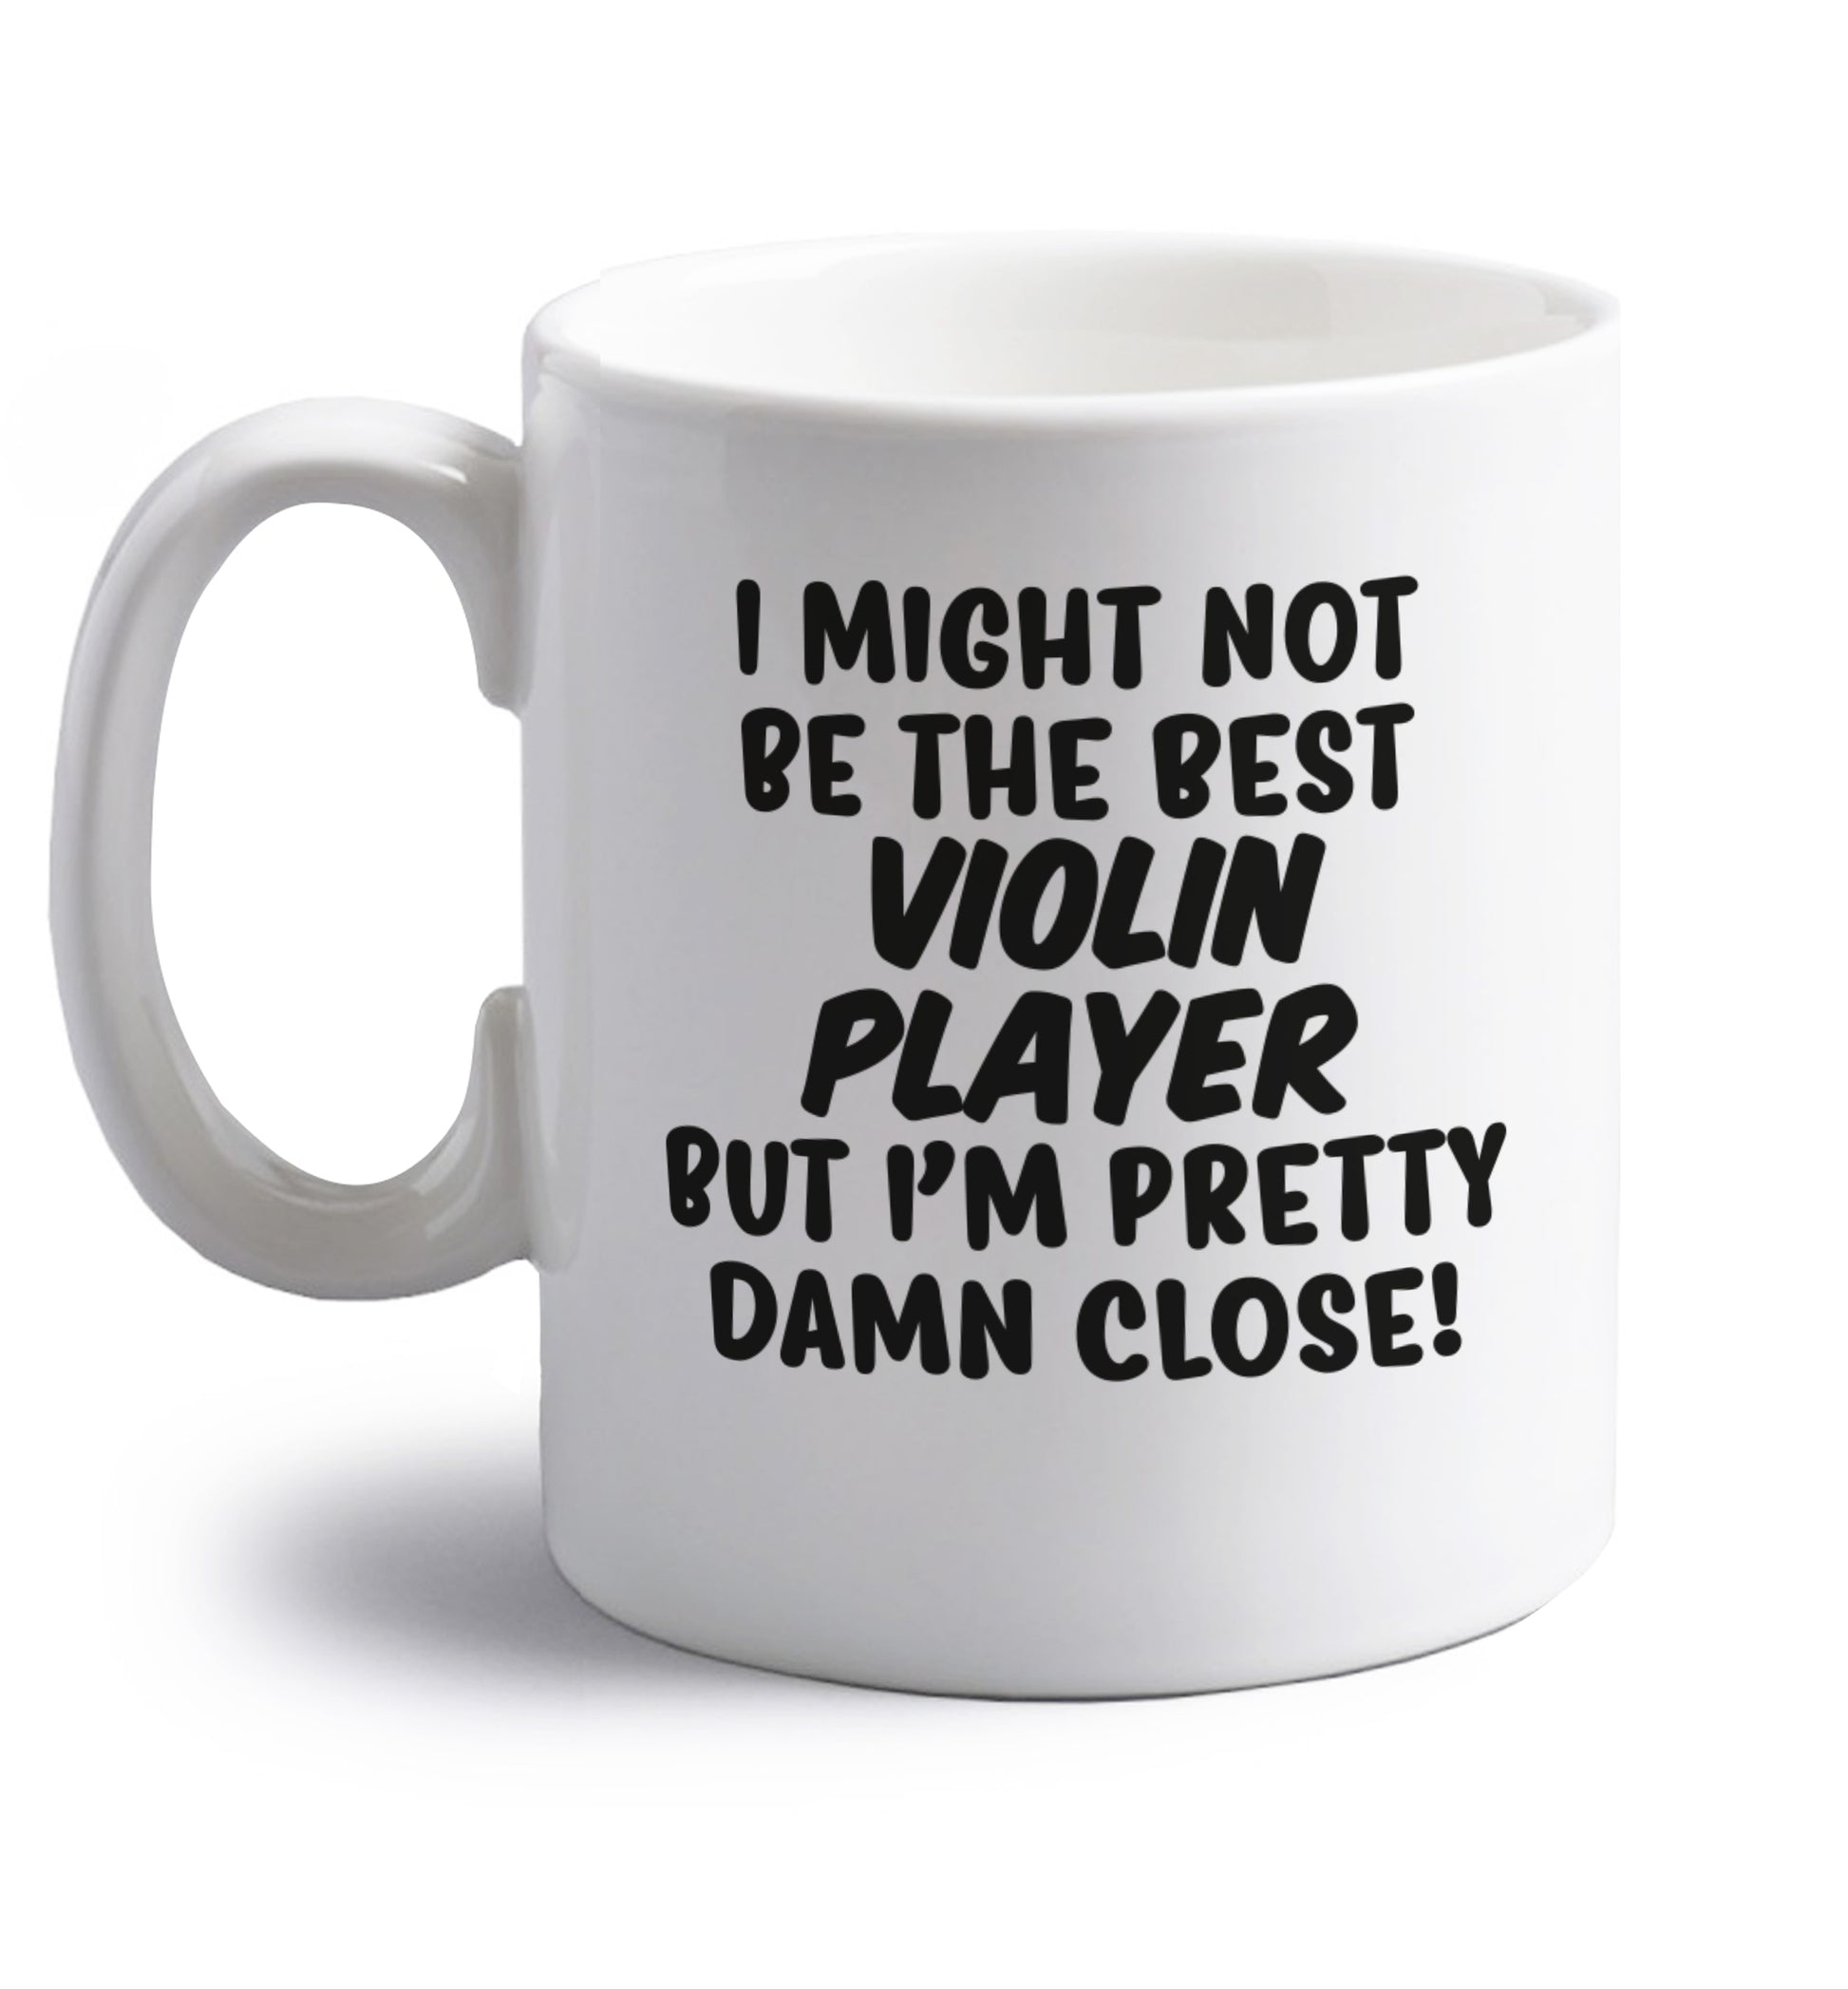 I might not be the best violin player but I'm pretty close right handed white ceramic mug 